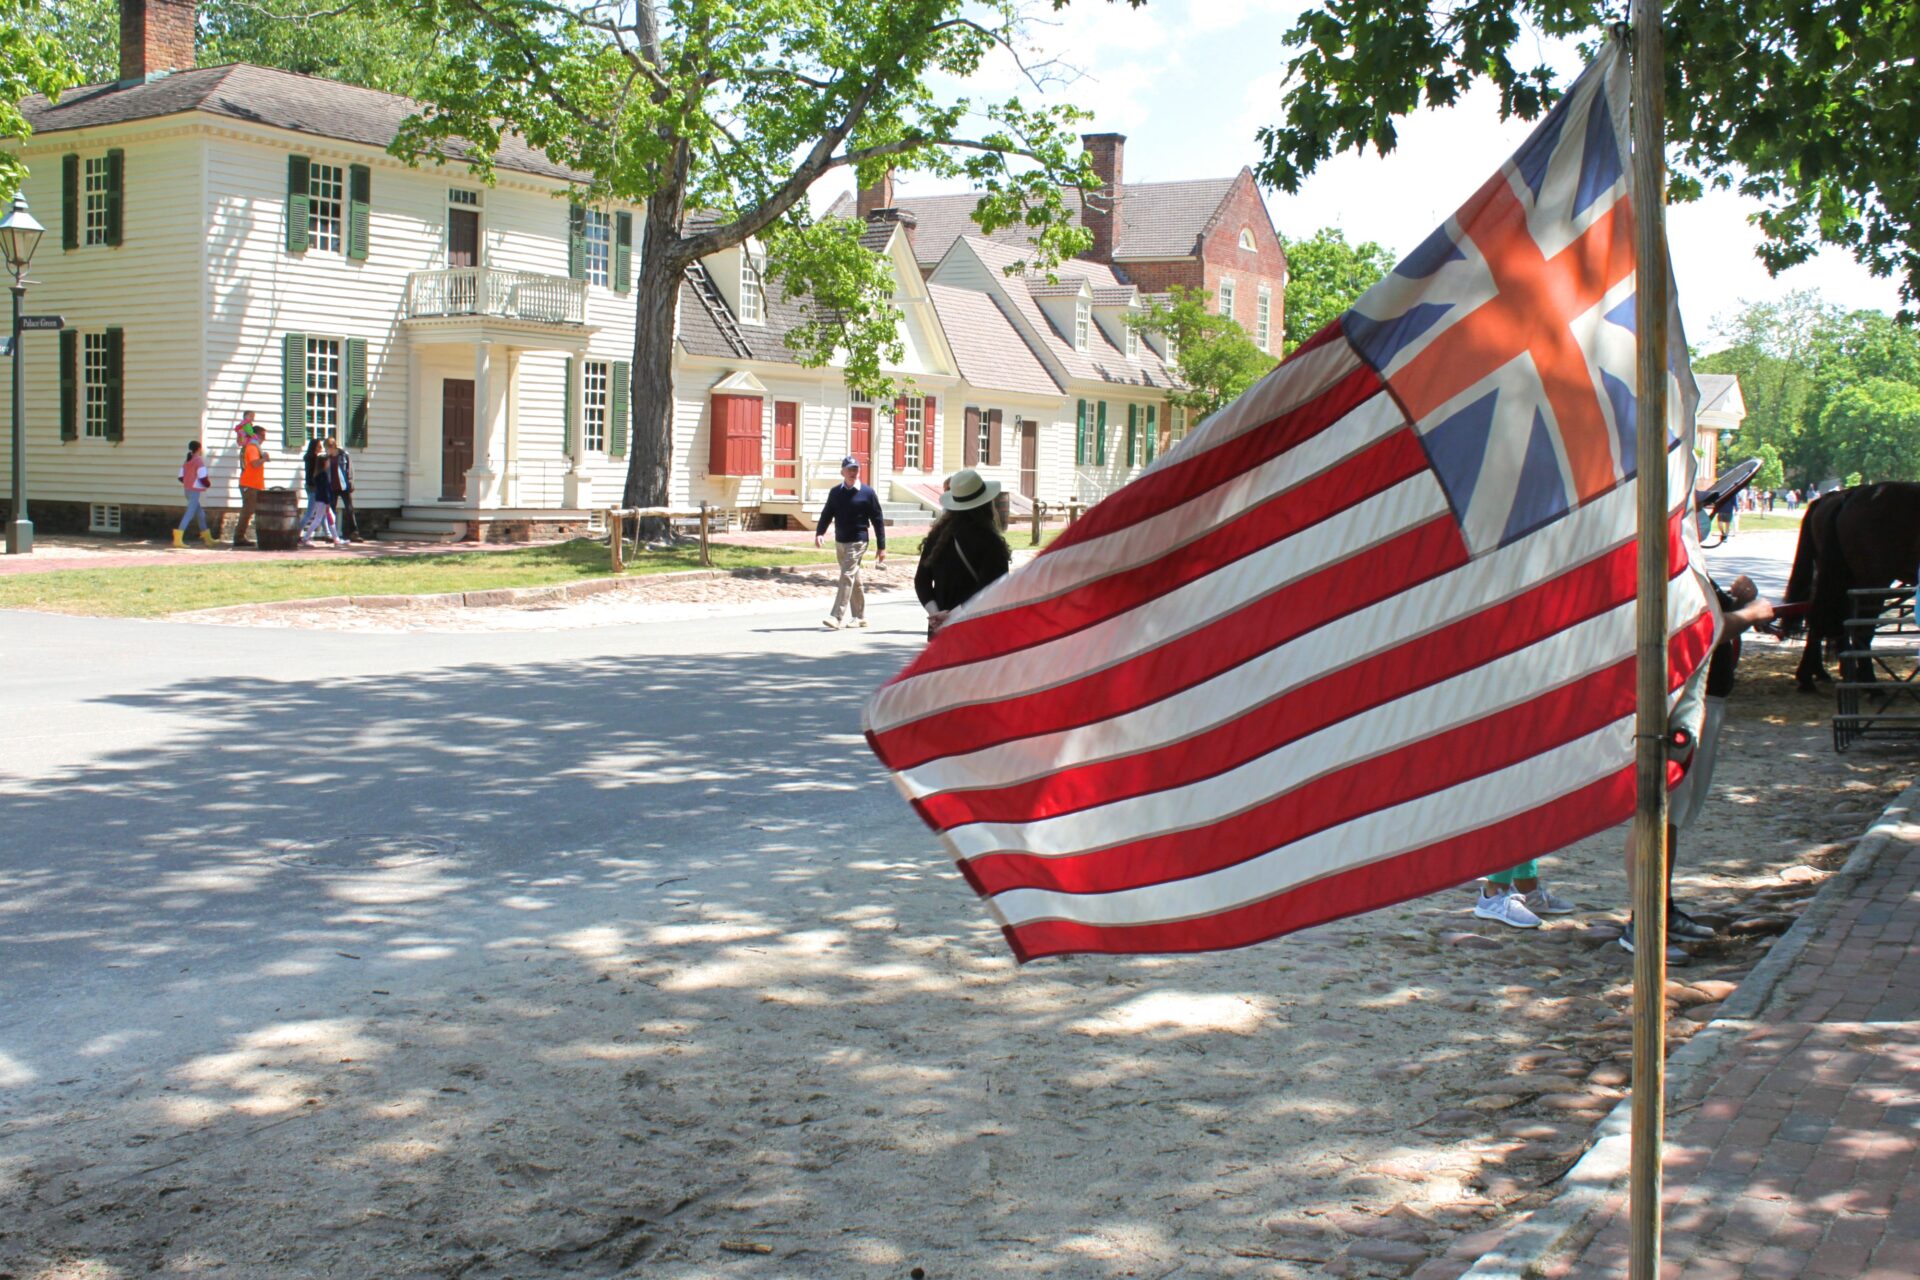 Tips for Visiting Colonial Williamsburg with Kids